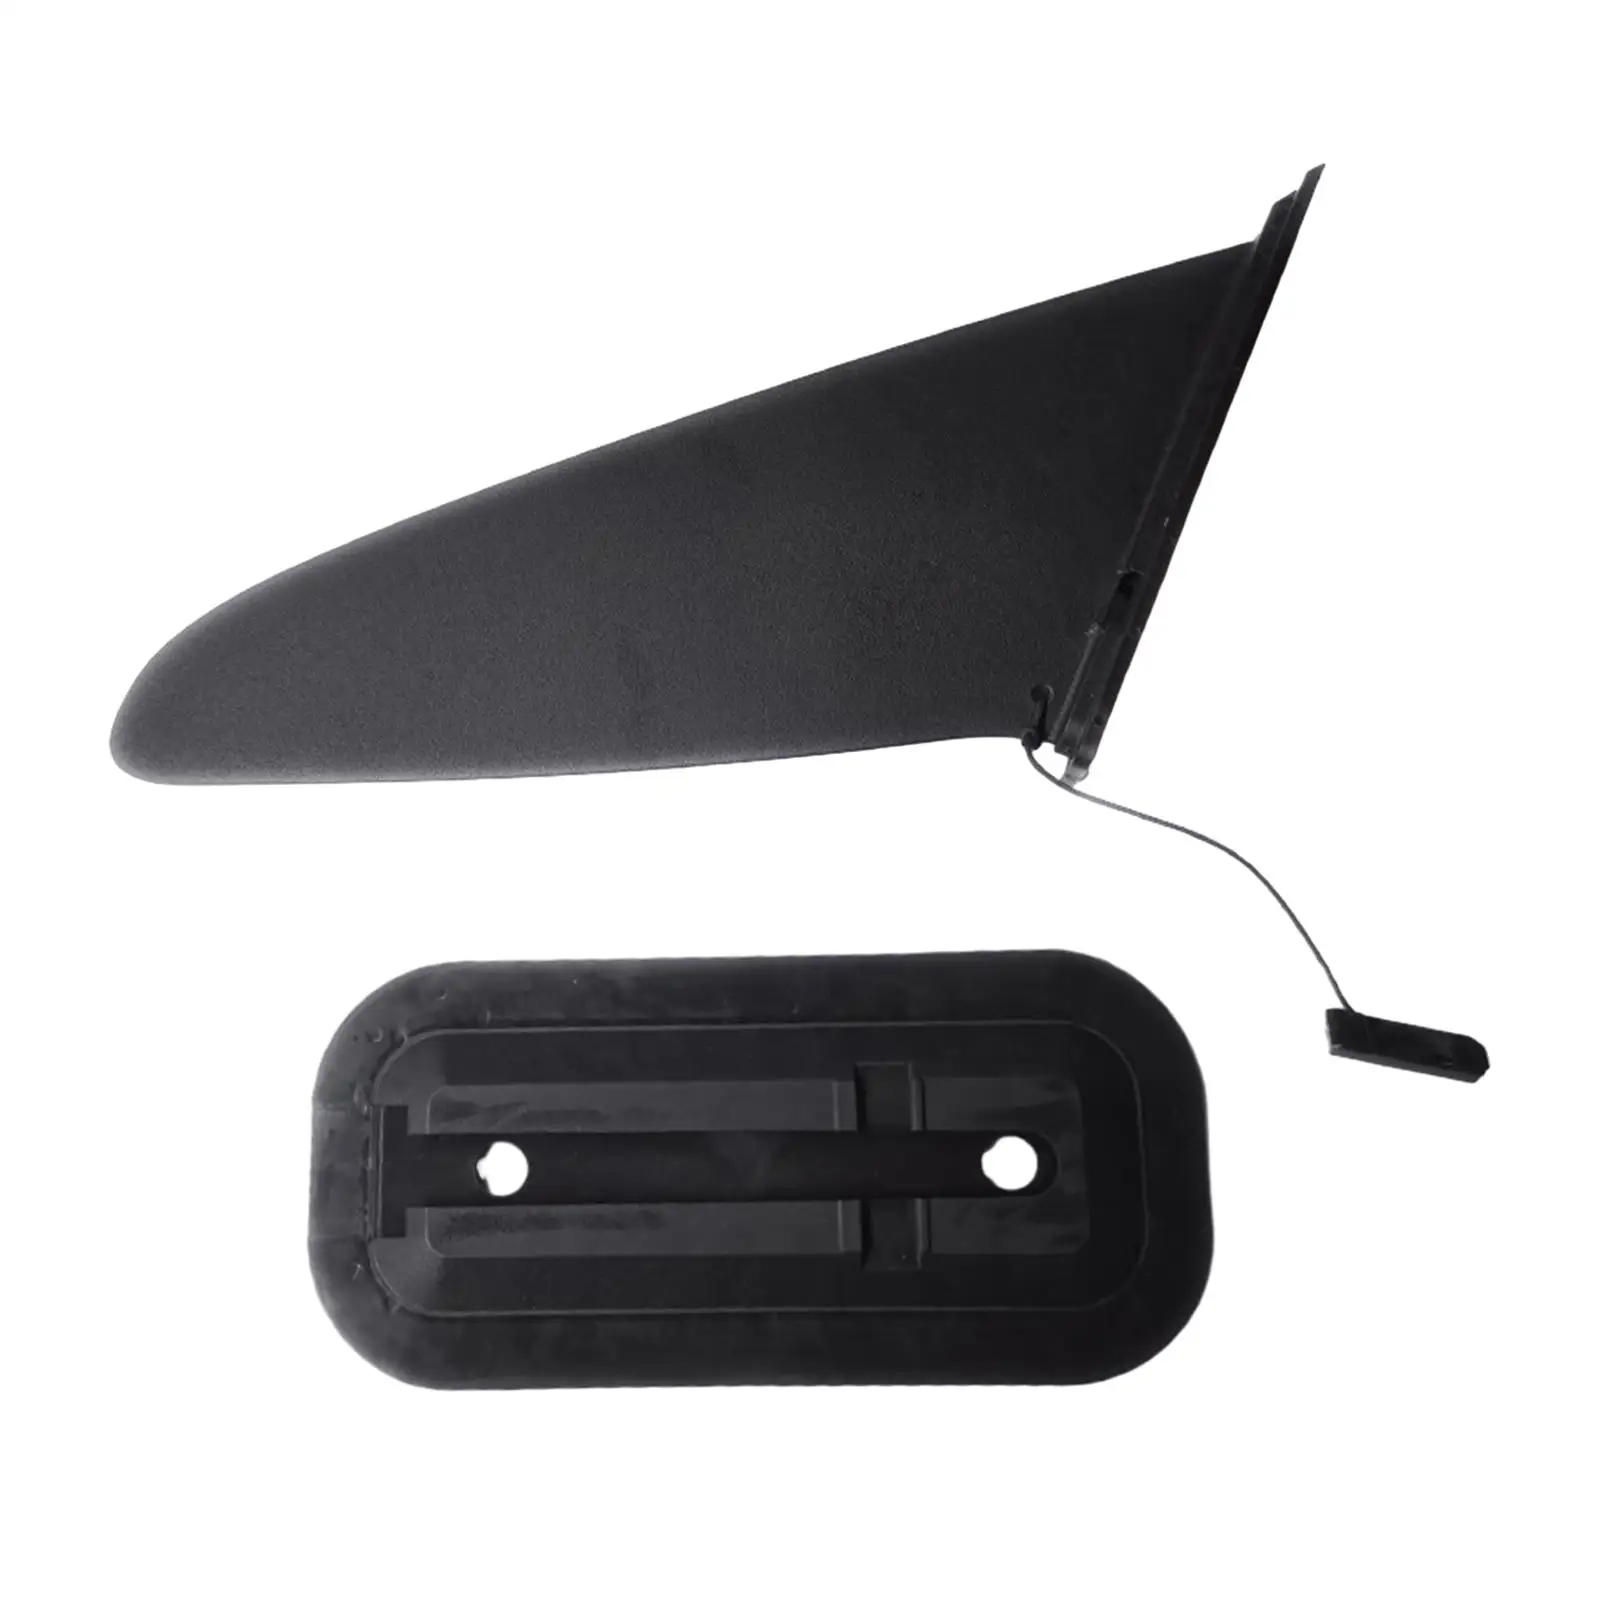 Surfing Fin Improves Stability Replacement Surf Boards Longboard Surfboards Thruster Fin for Beach Boat Sports Dinghy